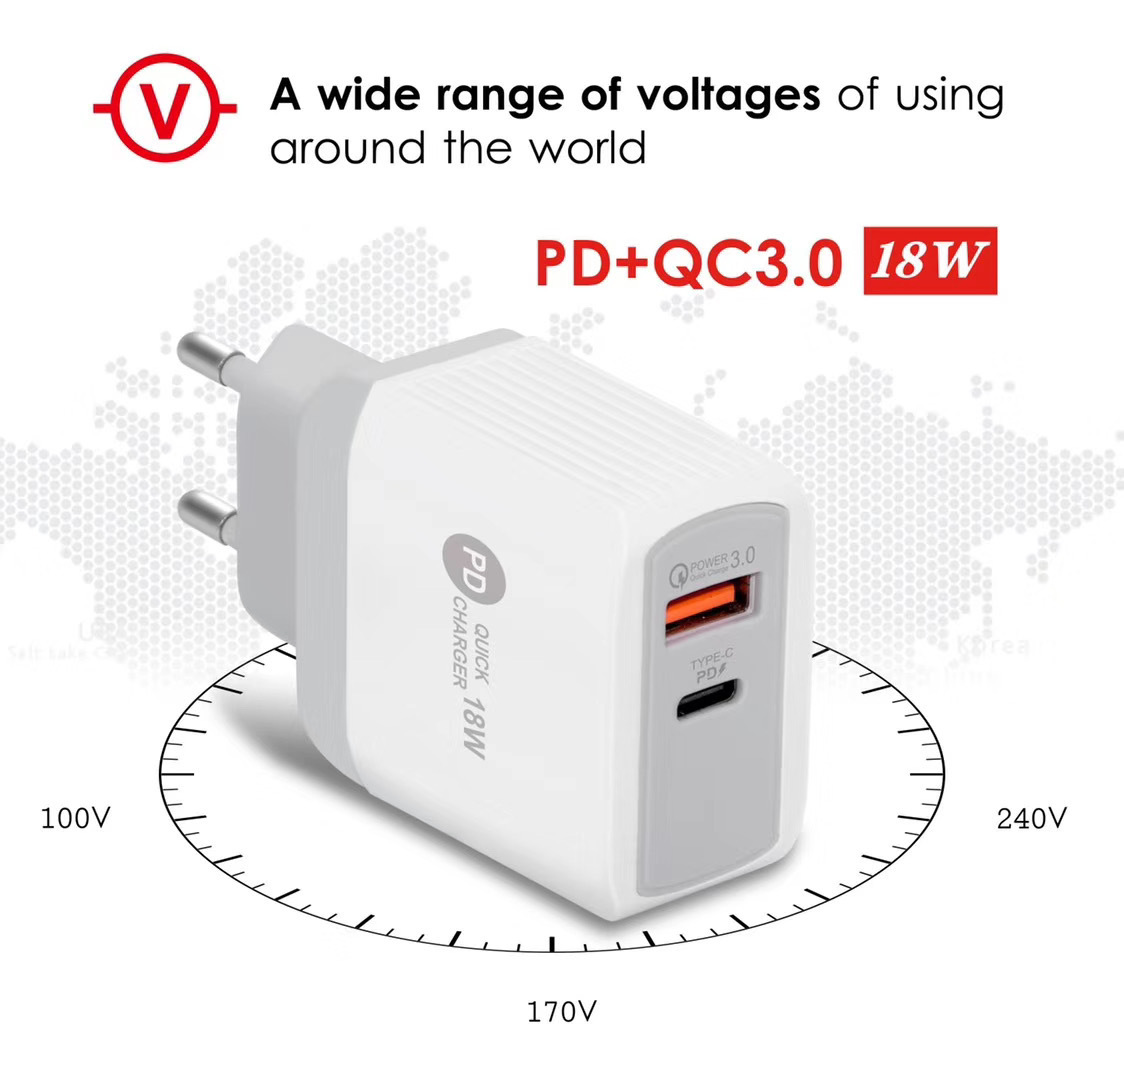 Bakeey-USB-Charger-QC30-PD18W-Fast-Charging-For-iPhone-XS-11Pro-Huawei-P30-P40-Pro-Mi10-S20-Note-20-1725015-2